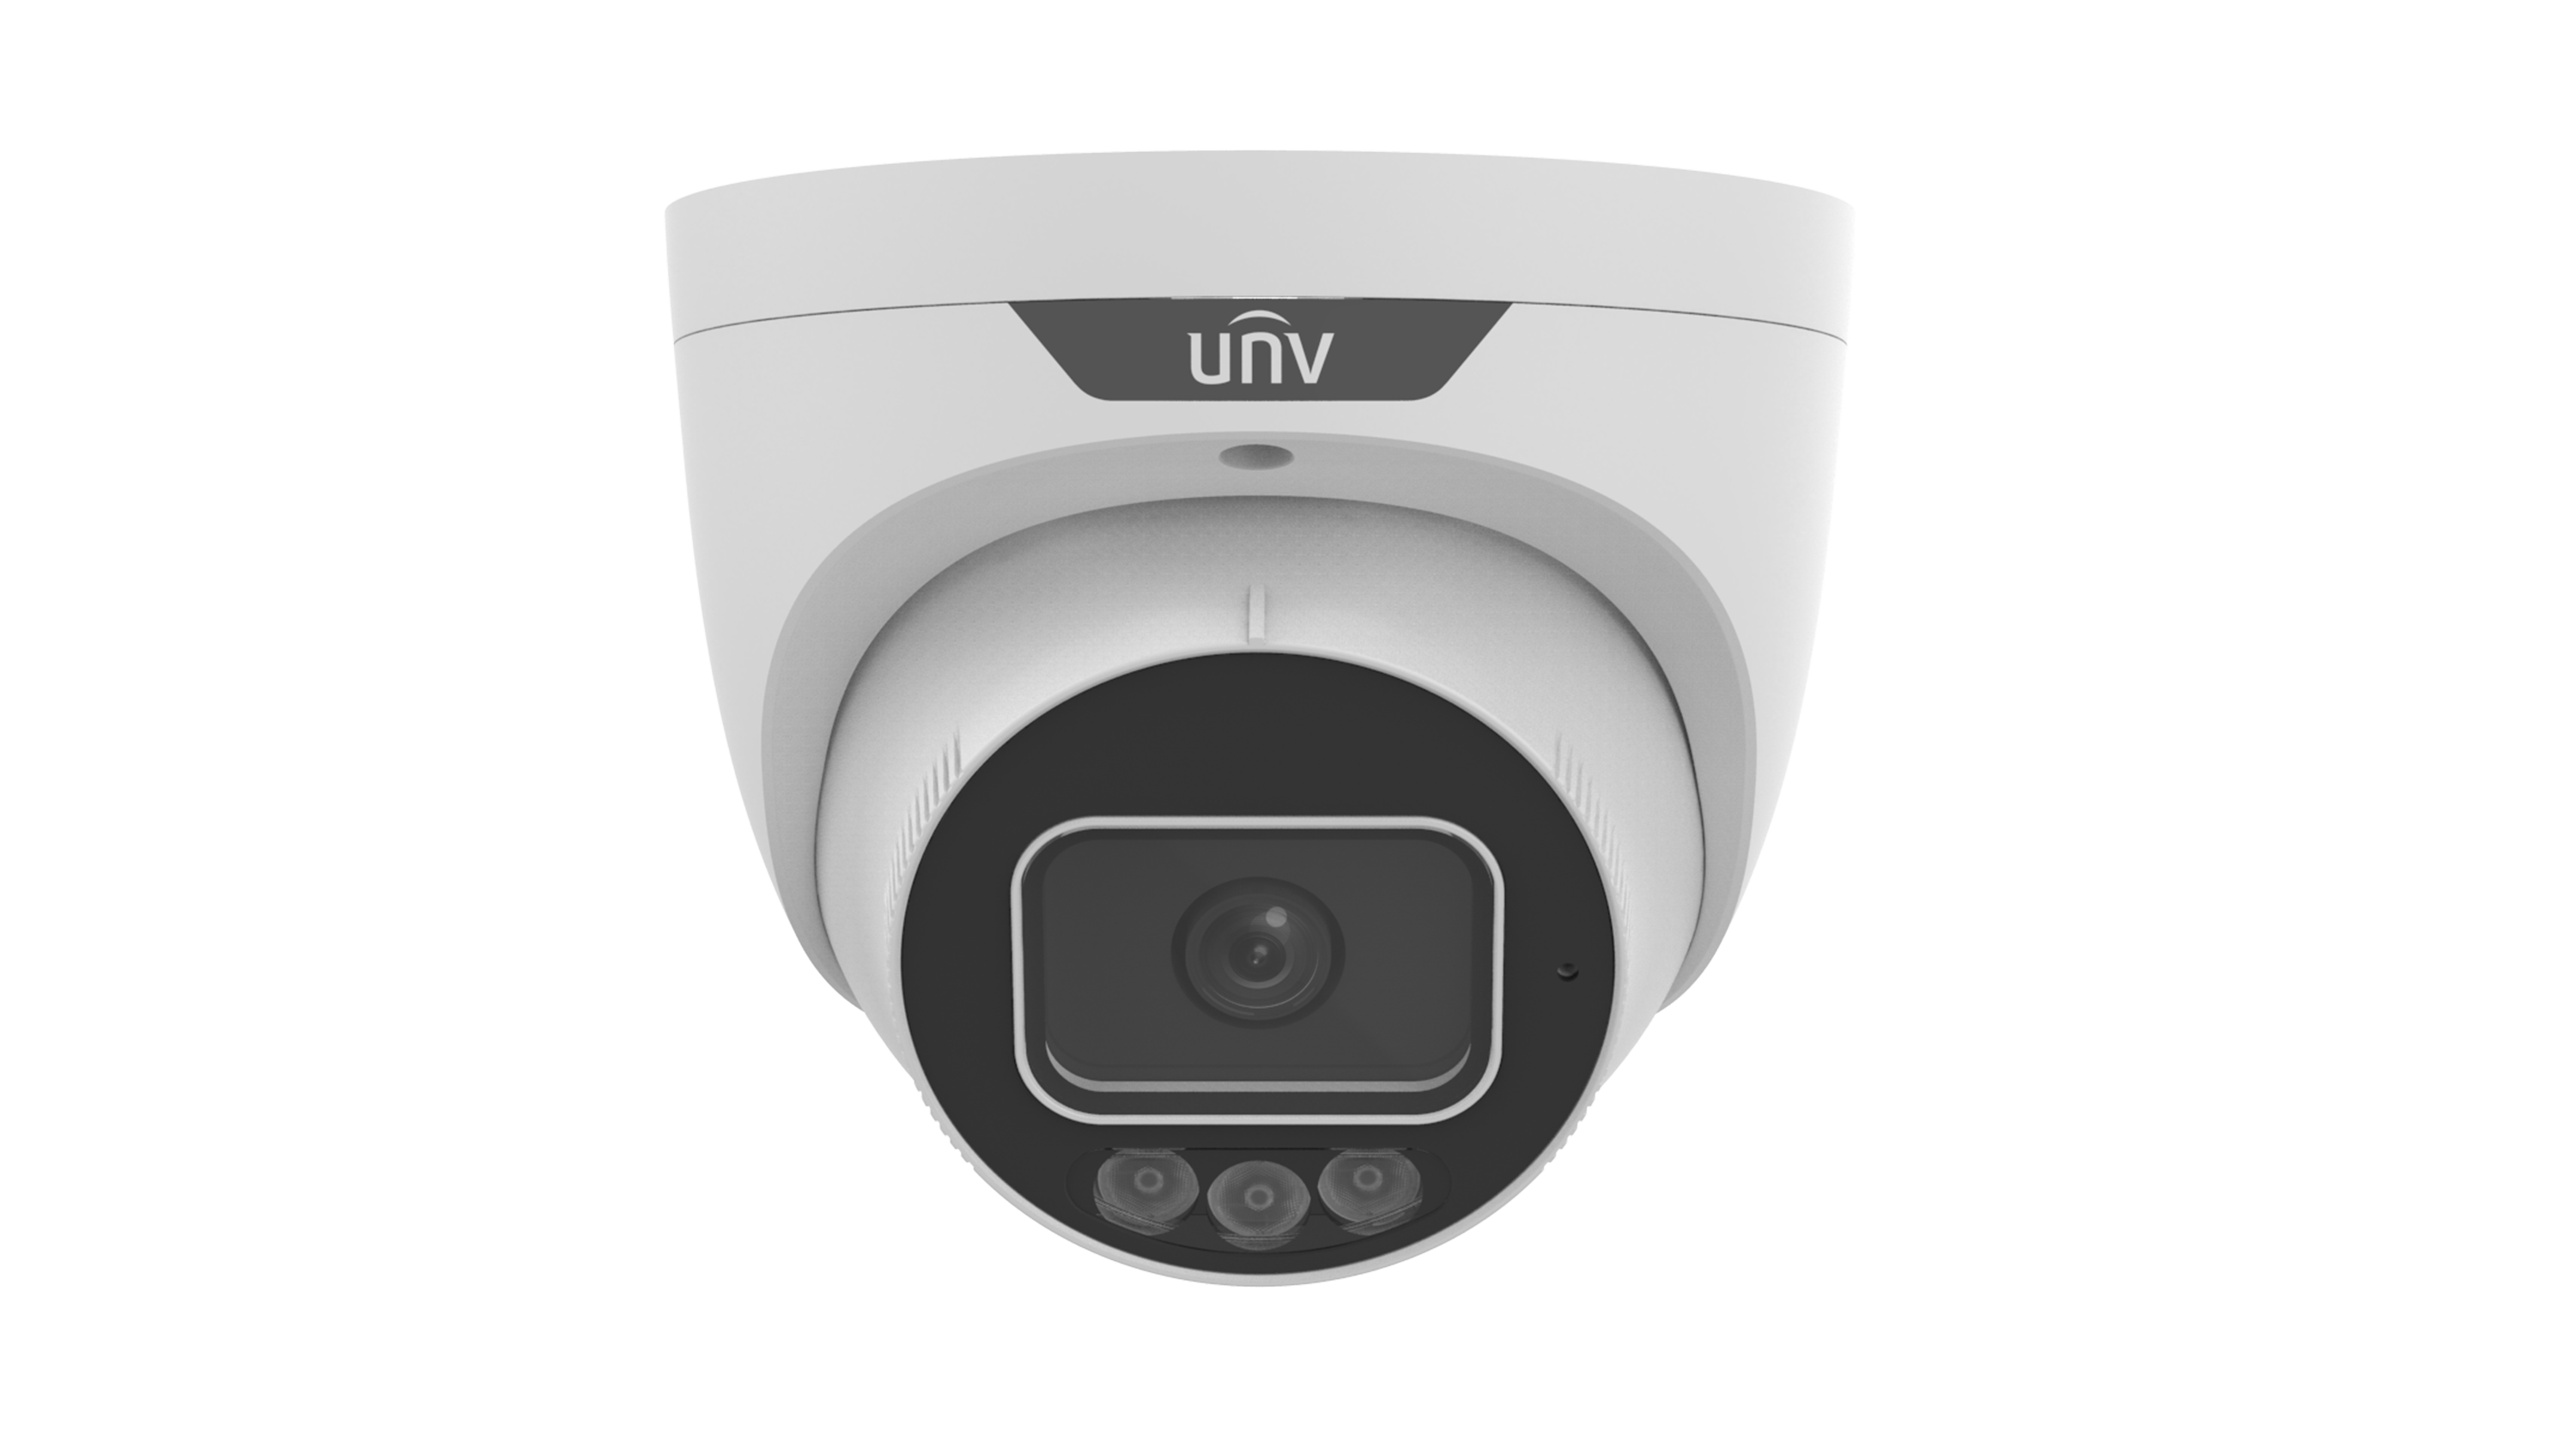 PRIME SERIES IP CAMERA WHITE AI TRIGUARD 5MP H.264/5/5+/ MJPEG TURRET 130 WDR METAL 2.8MM FIXED LENS LIGHT HUNTER IR+WHITE LED 30M POE IP67 BUILT IN MIC AUDIO IN AUDIO OUT 1 x ALARM IN 1 x ALARM OUT SUPPORT UP TO 256GB SD 12VDC